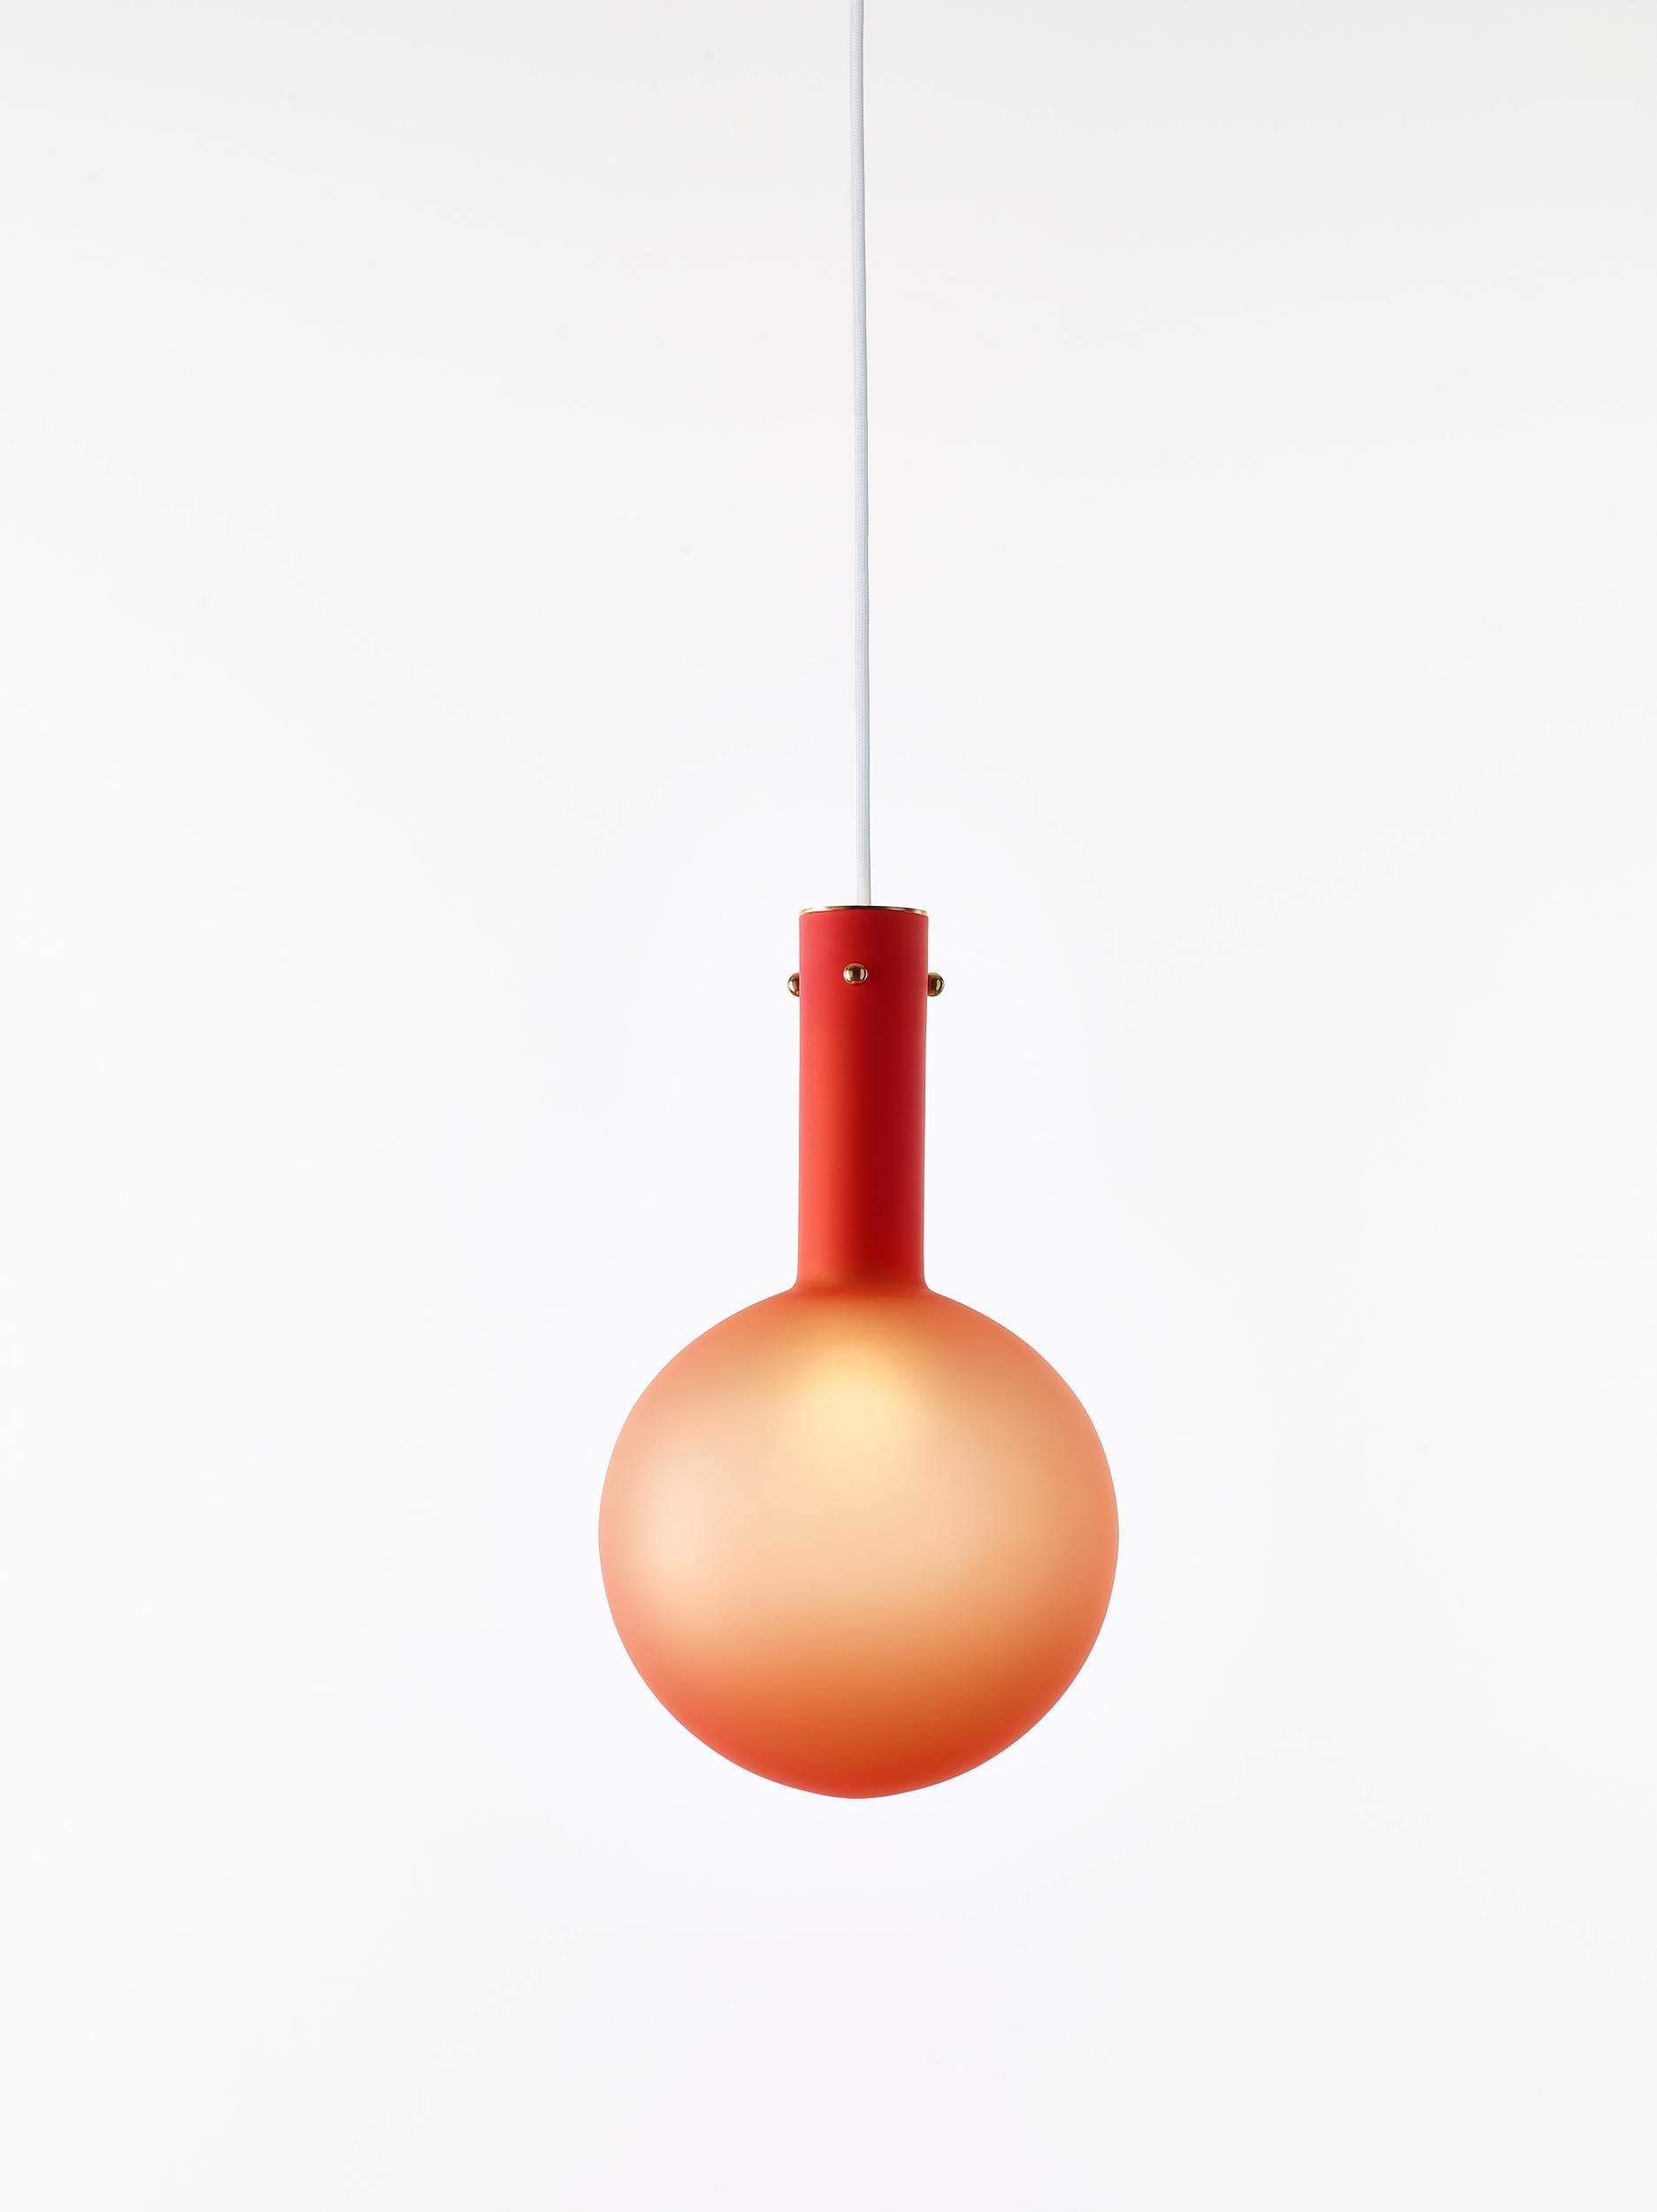 Set of 2 Matte red Sphaerae pendant lights by Dechem Studio
Dimensions: D 20 x H 180 cm
Materials: Brass, metal, glass.
Also available: Different finishes and colours available

Only one homogenous piece of hand-blown glass creates the main